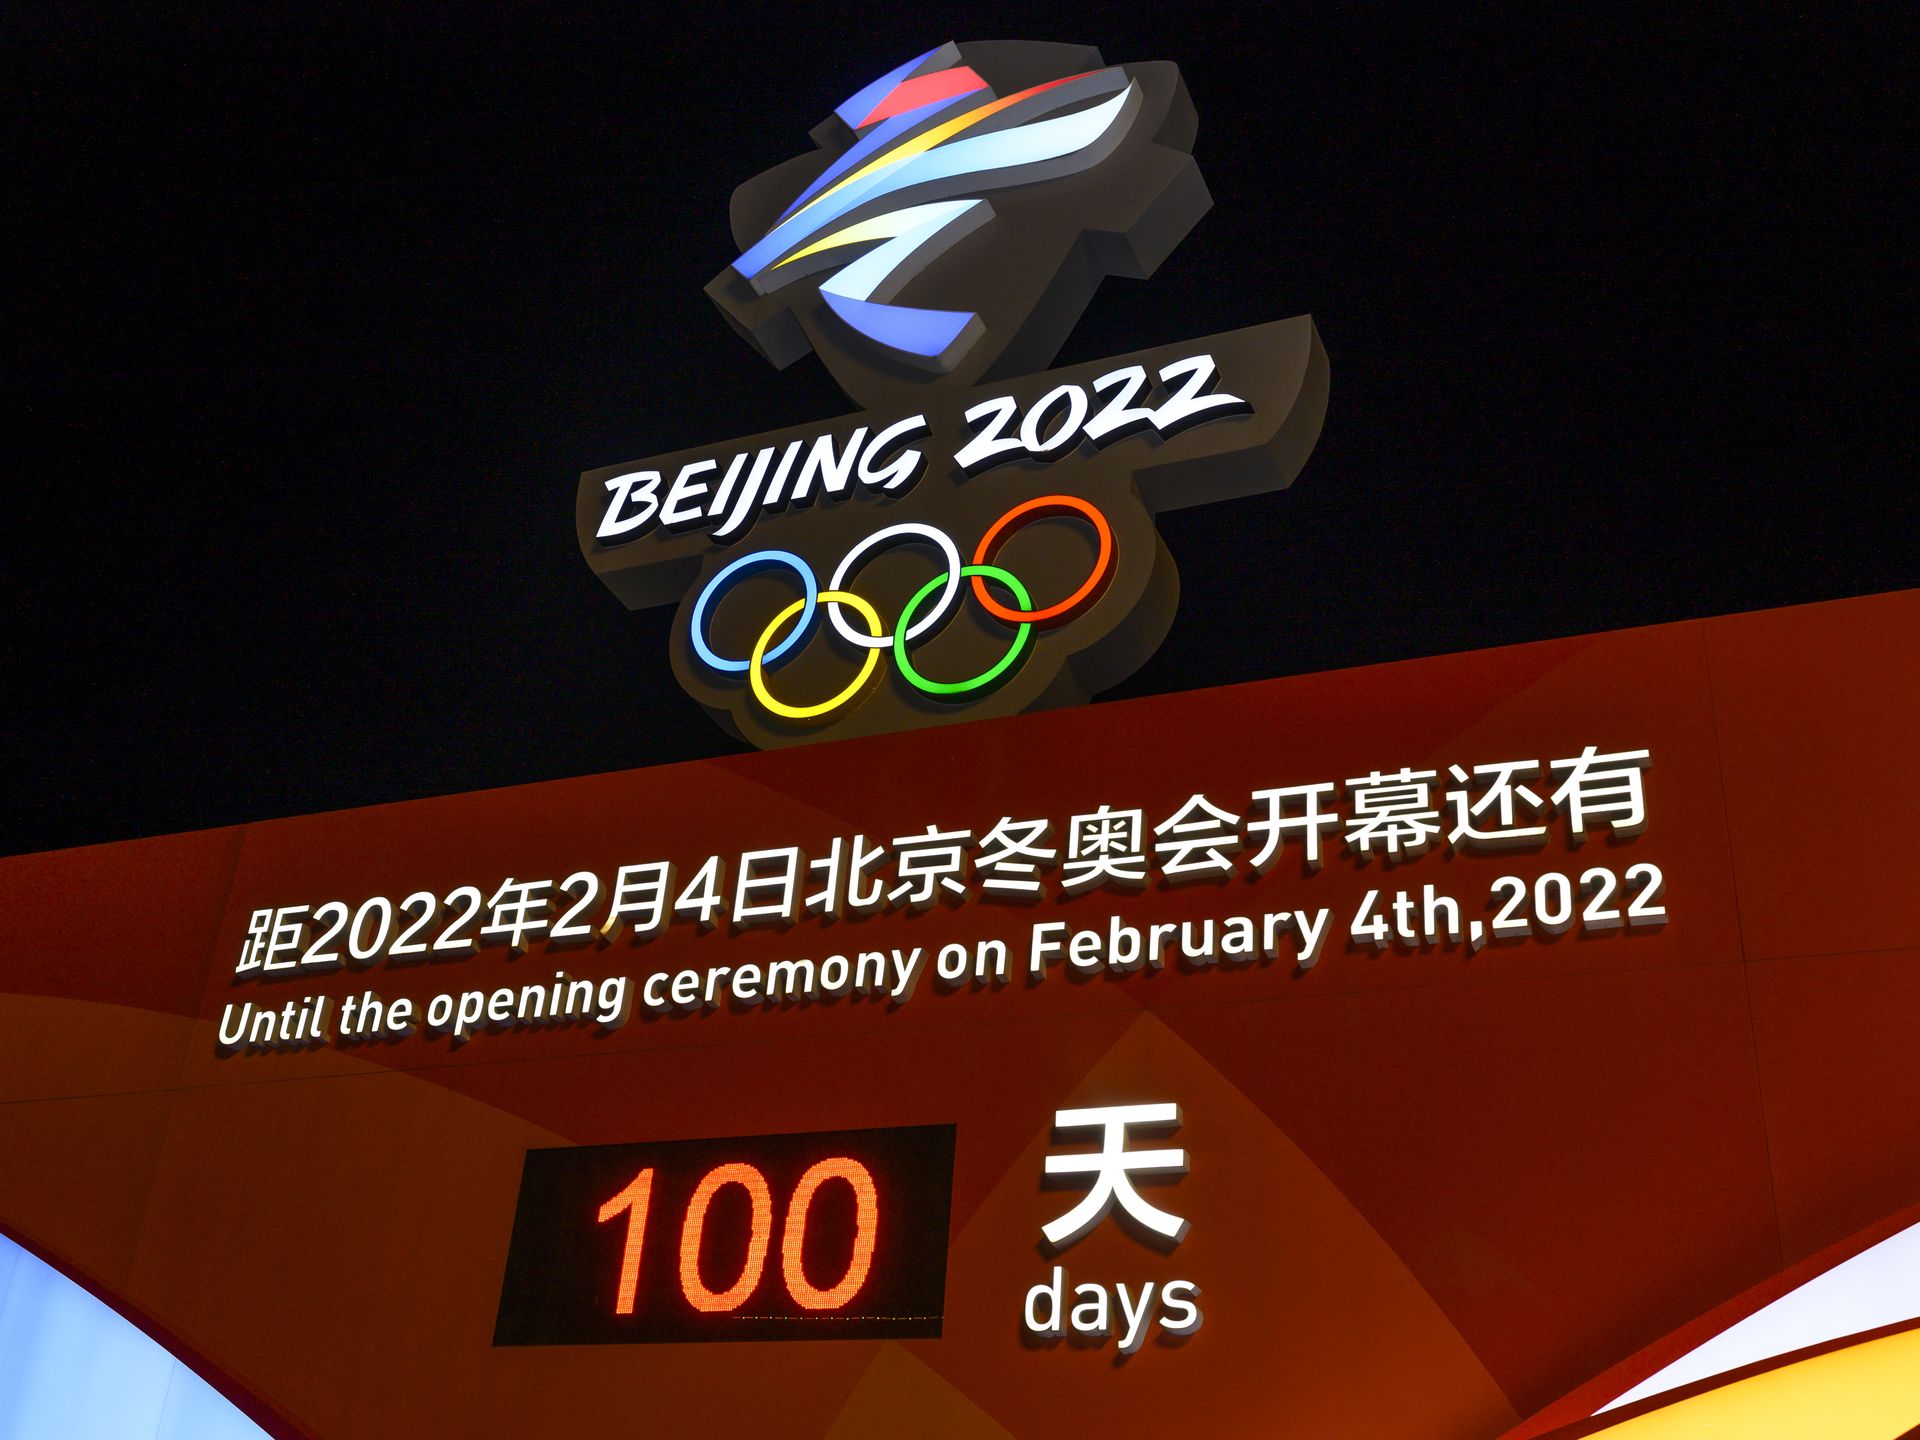 February 4, 2022 Beijing Winter Olympics news and results